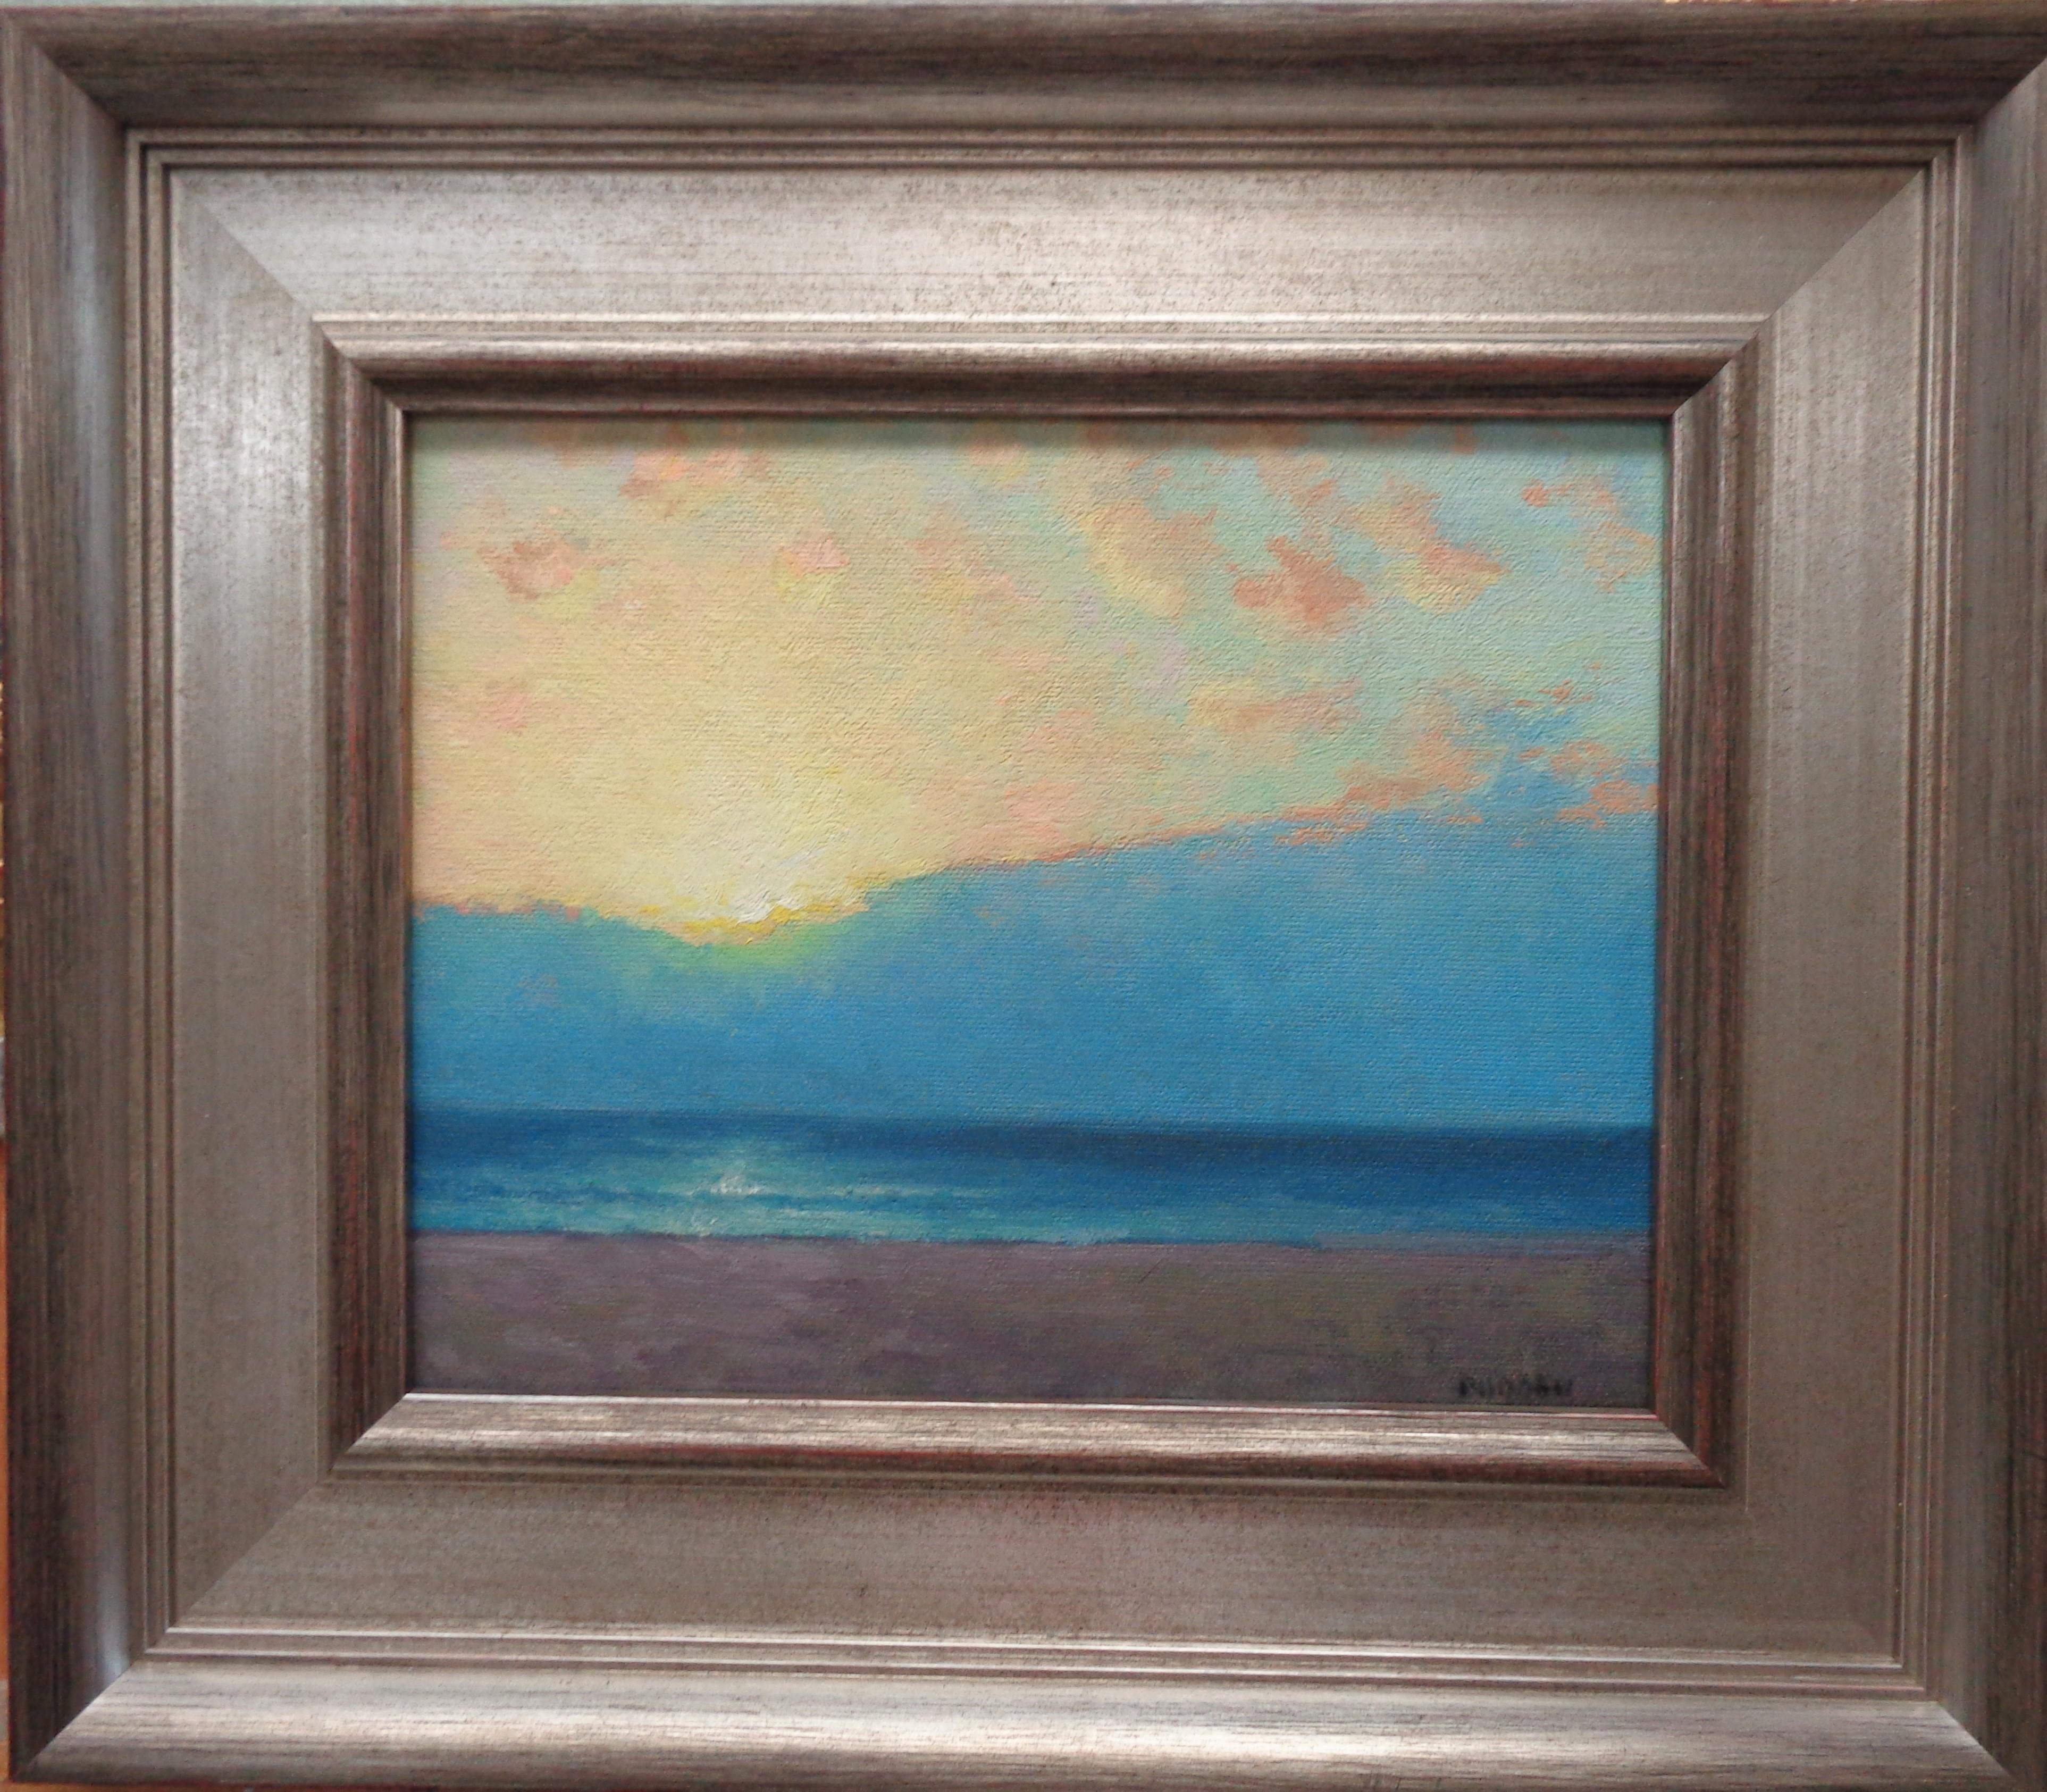 Morning Abstraction is an oil painting on canvas panel by award winning contemporary artist Michael Budden that showcases a beautiful sunrise seascape as the sun peeks over a morning cloud line getting ready to shine its light onto the world. This